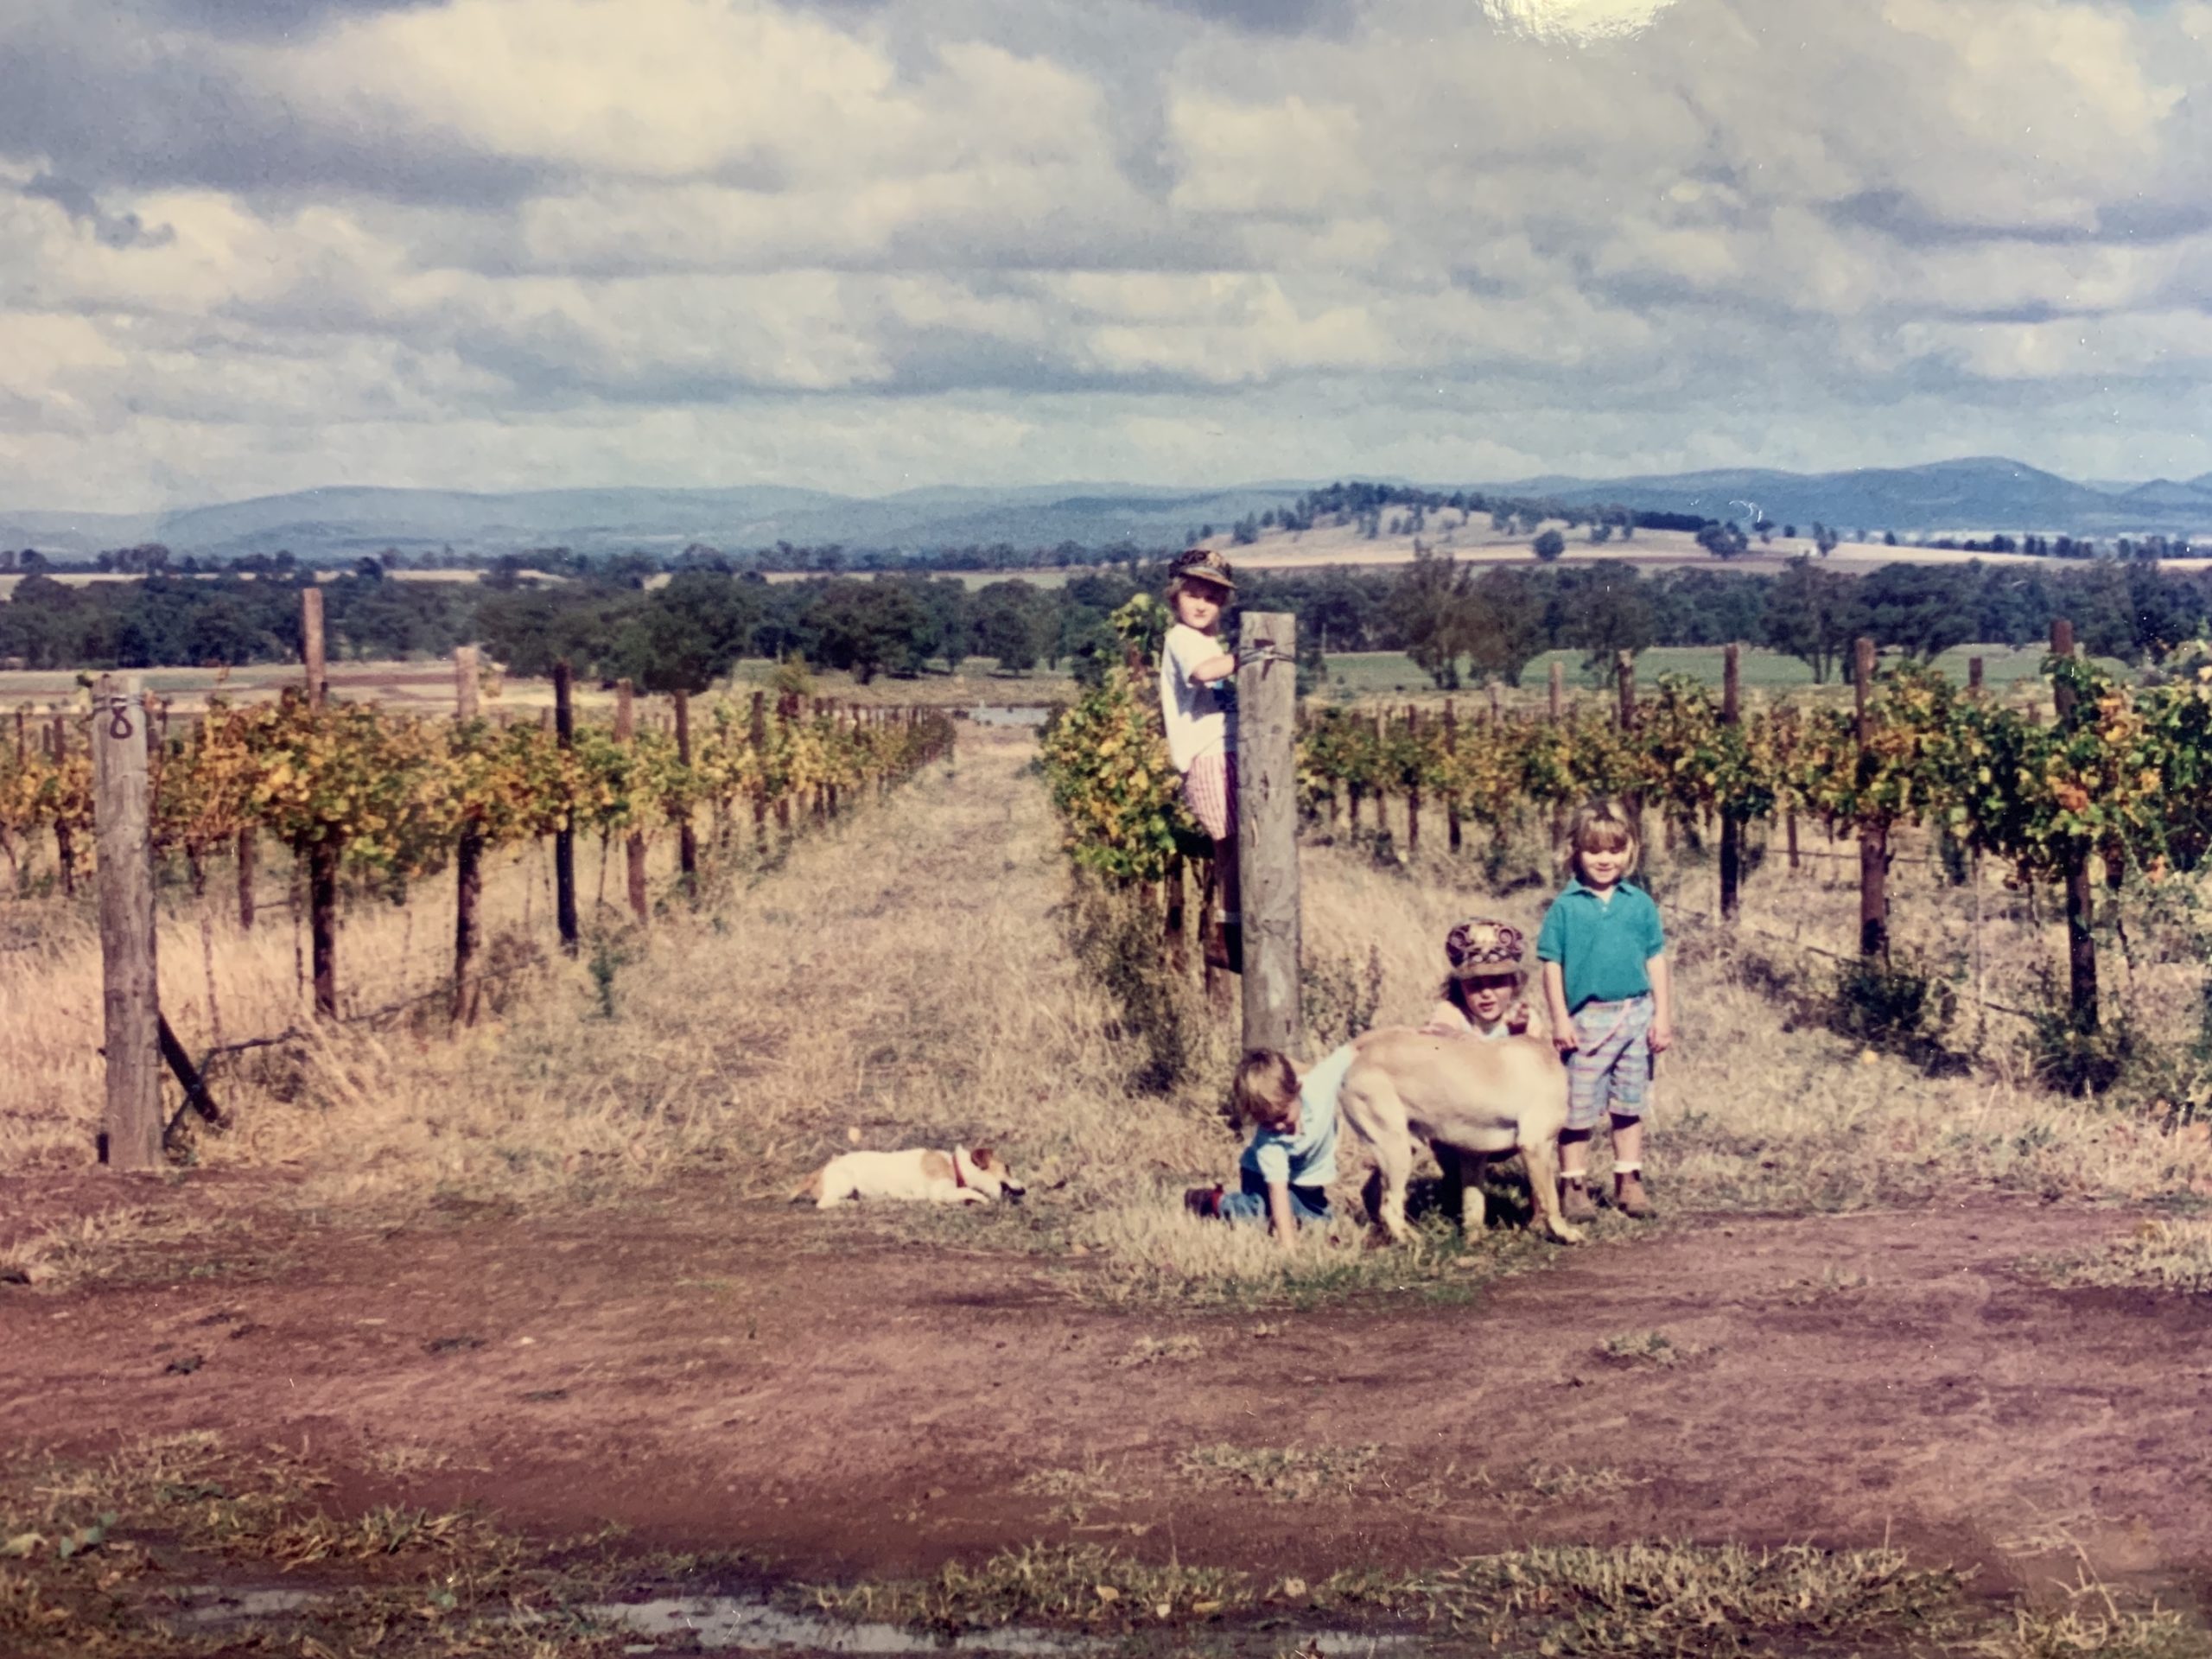 1995 - Nadja and her three sisters; Isabella, Veronica and Gabrielle at the Wallington Vineyard in Canowindra.  (Nadja is the one climbing the headpost)
